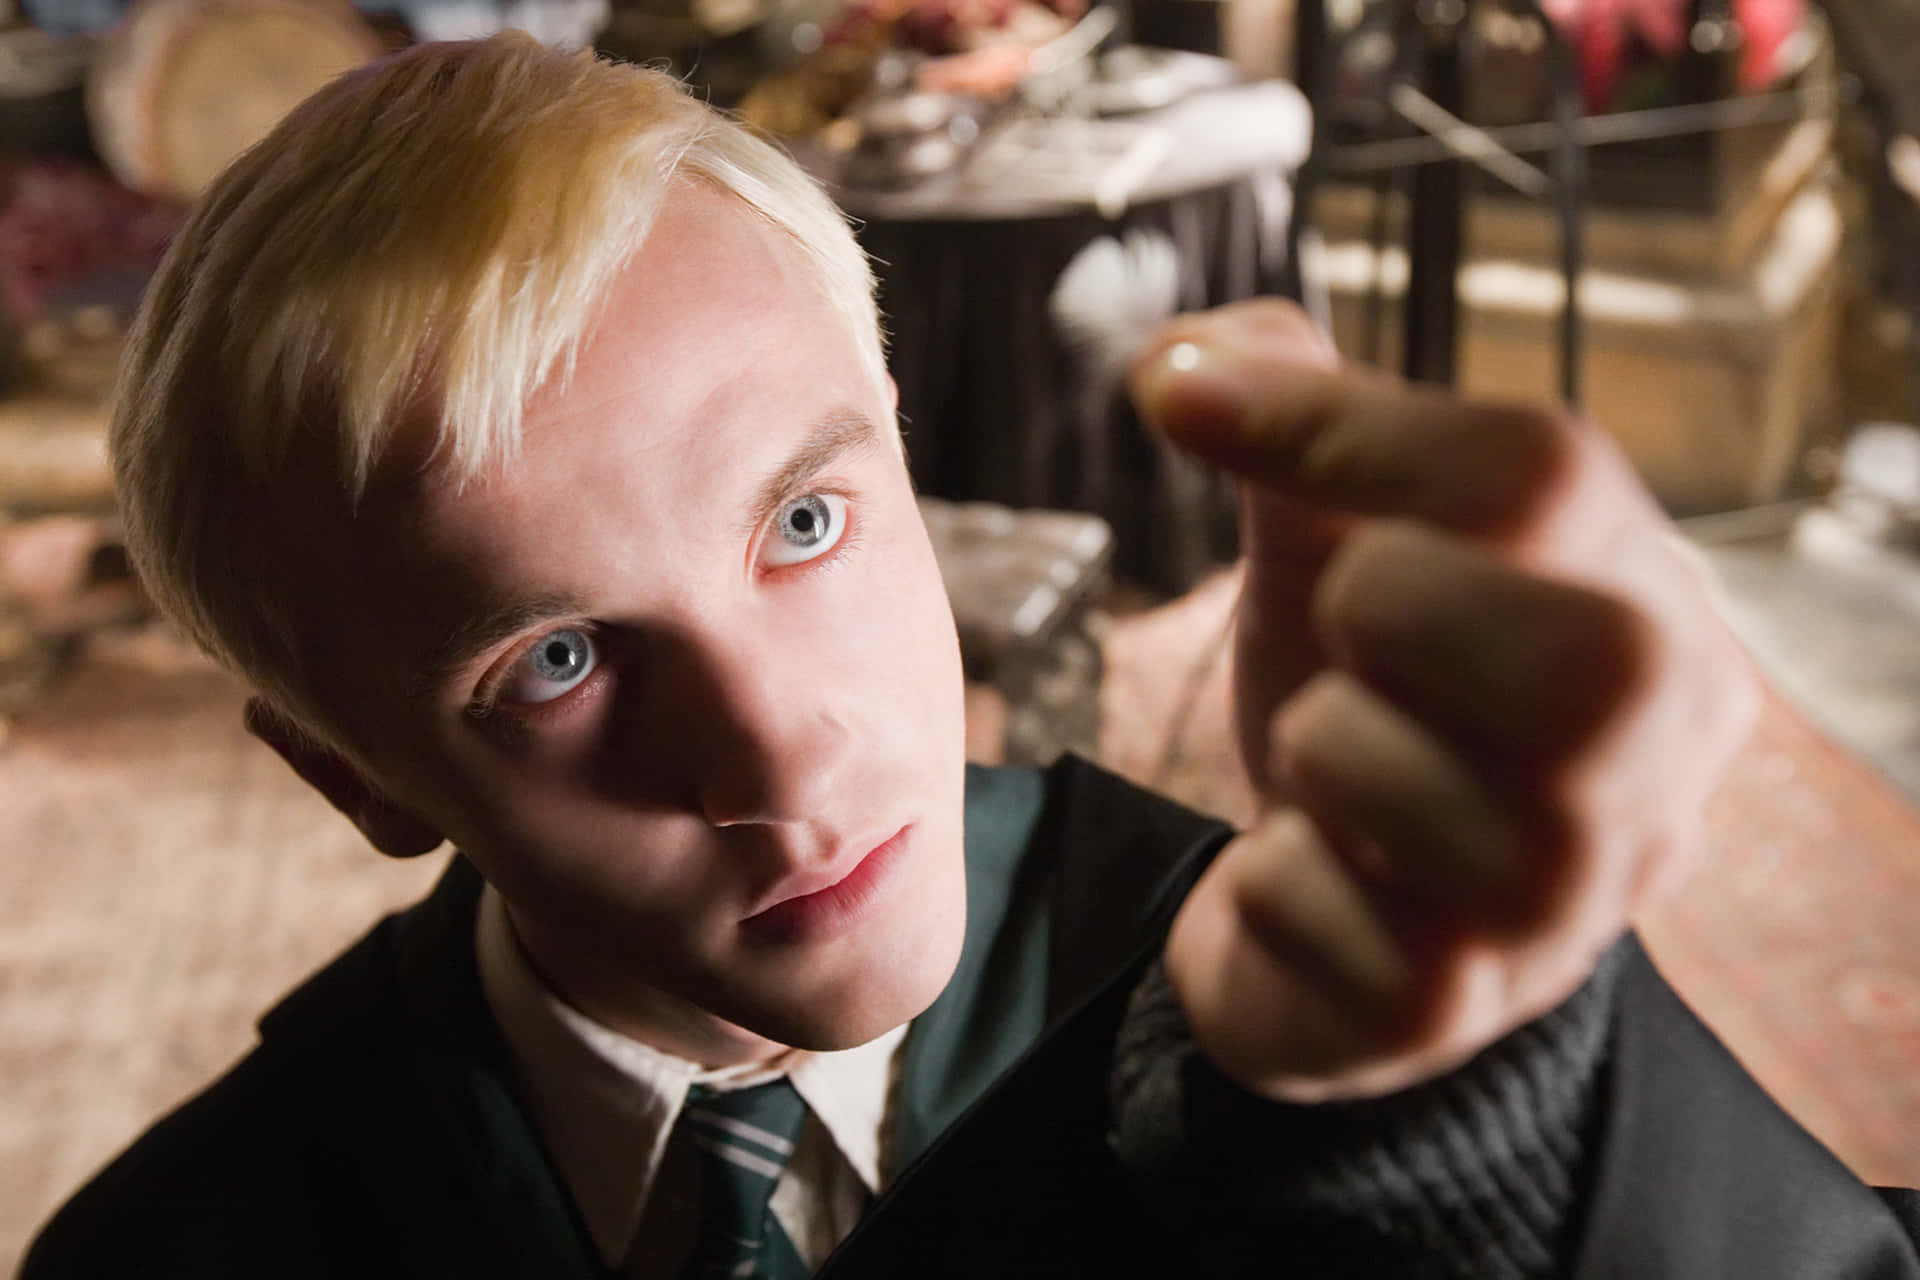 “Draco Malfoy of the Harry Potter Series”